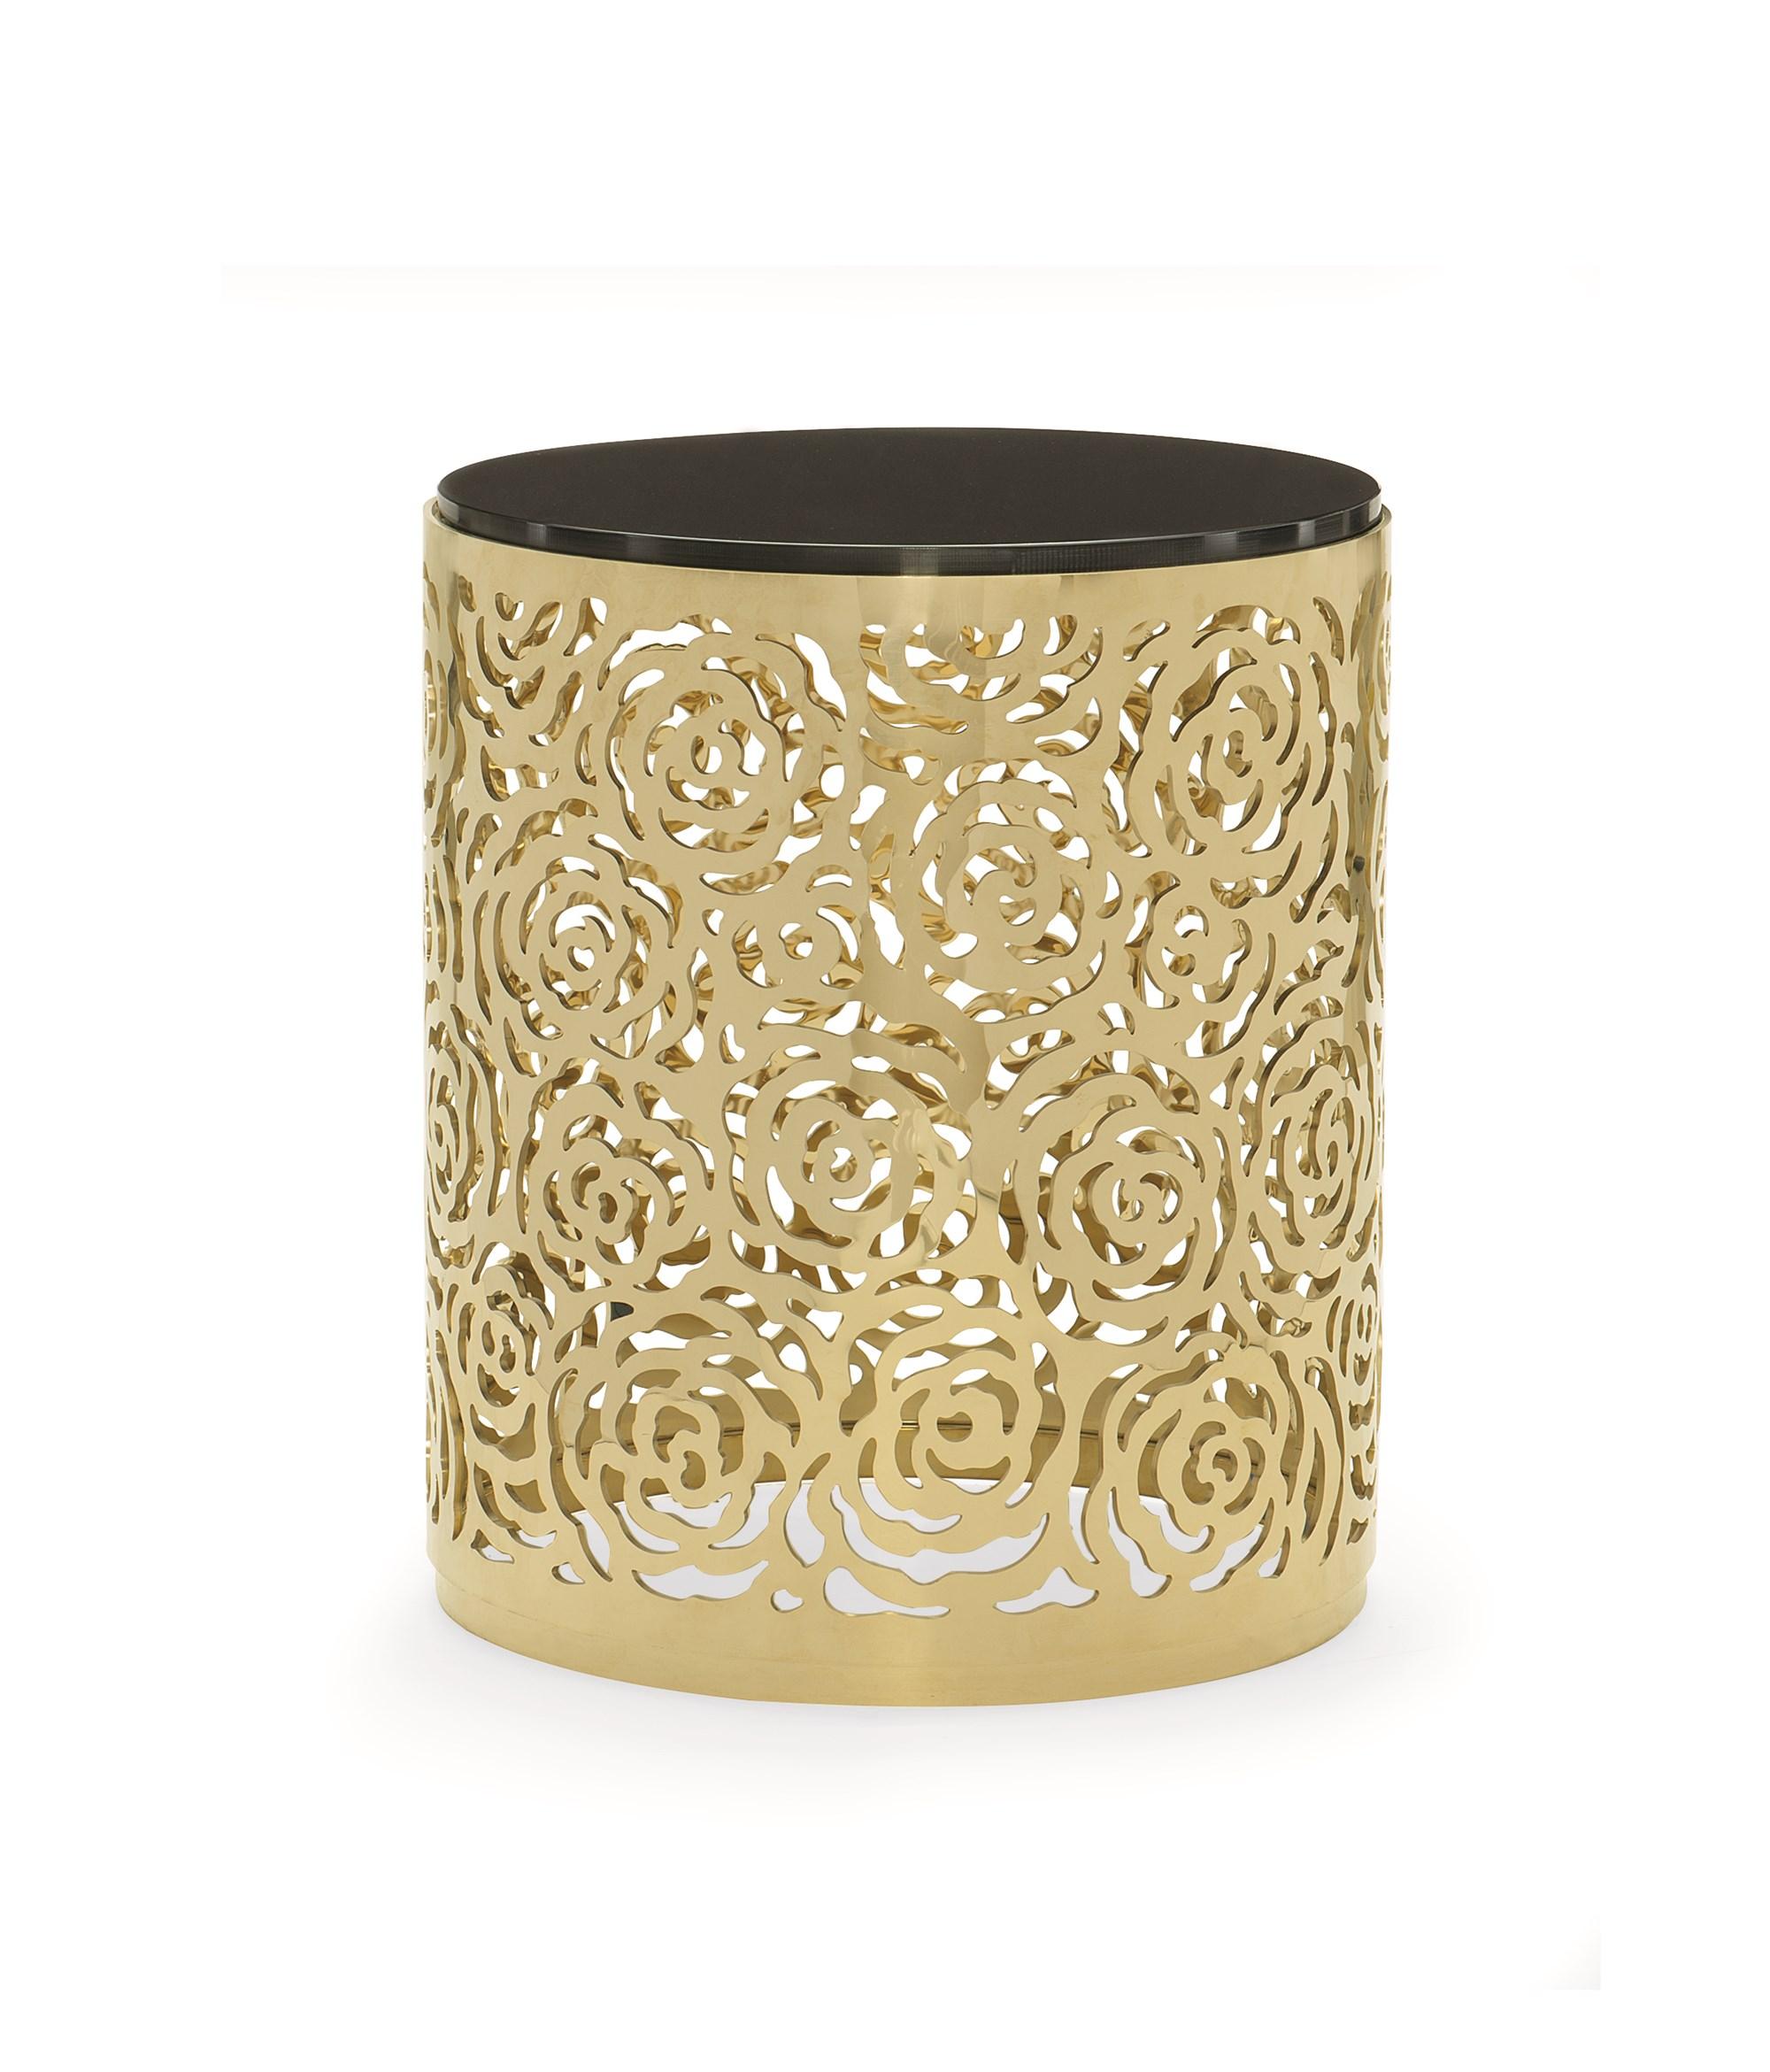 Contemporary End Table THE ROSE SIDE SIG-416-415 in Gold, Black 